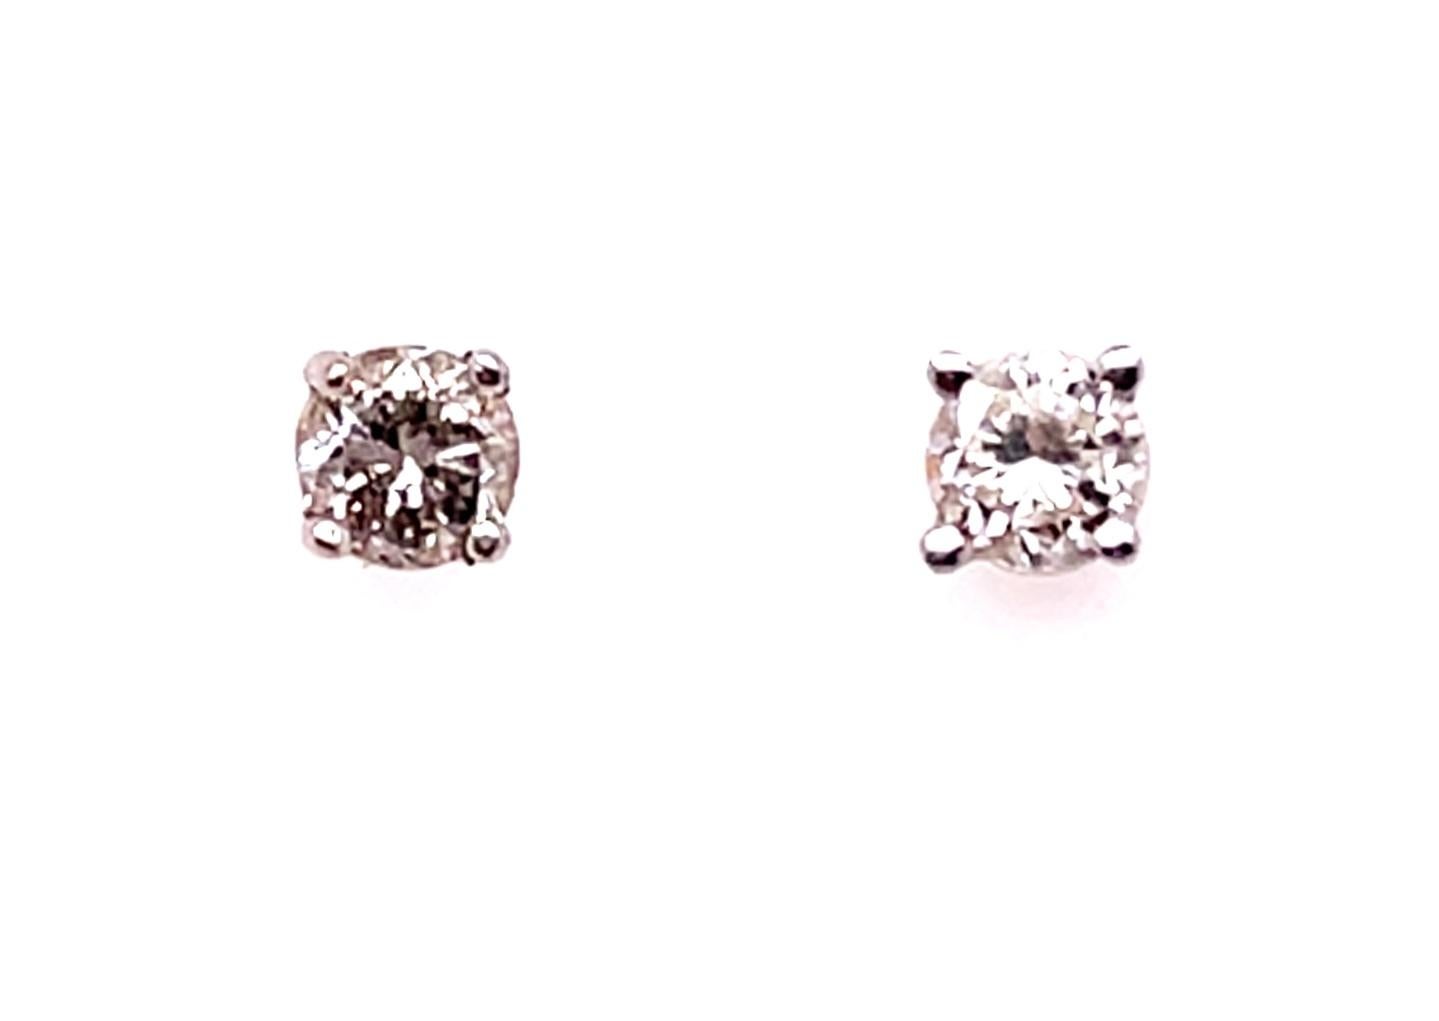 14 Karat White Gold And Round Diamond Four Prong Stud Earrings Screw back
0.50 total round diamonds.
0.59 grams total weight